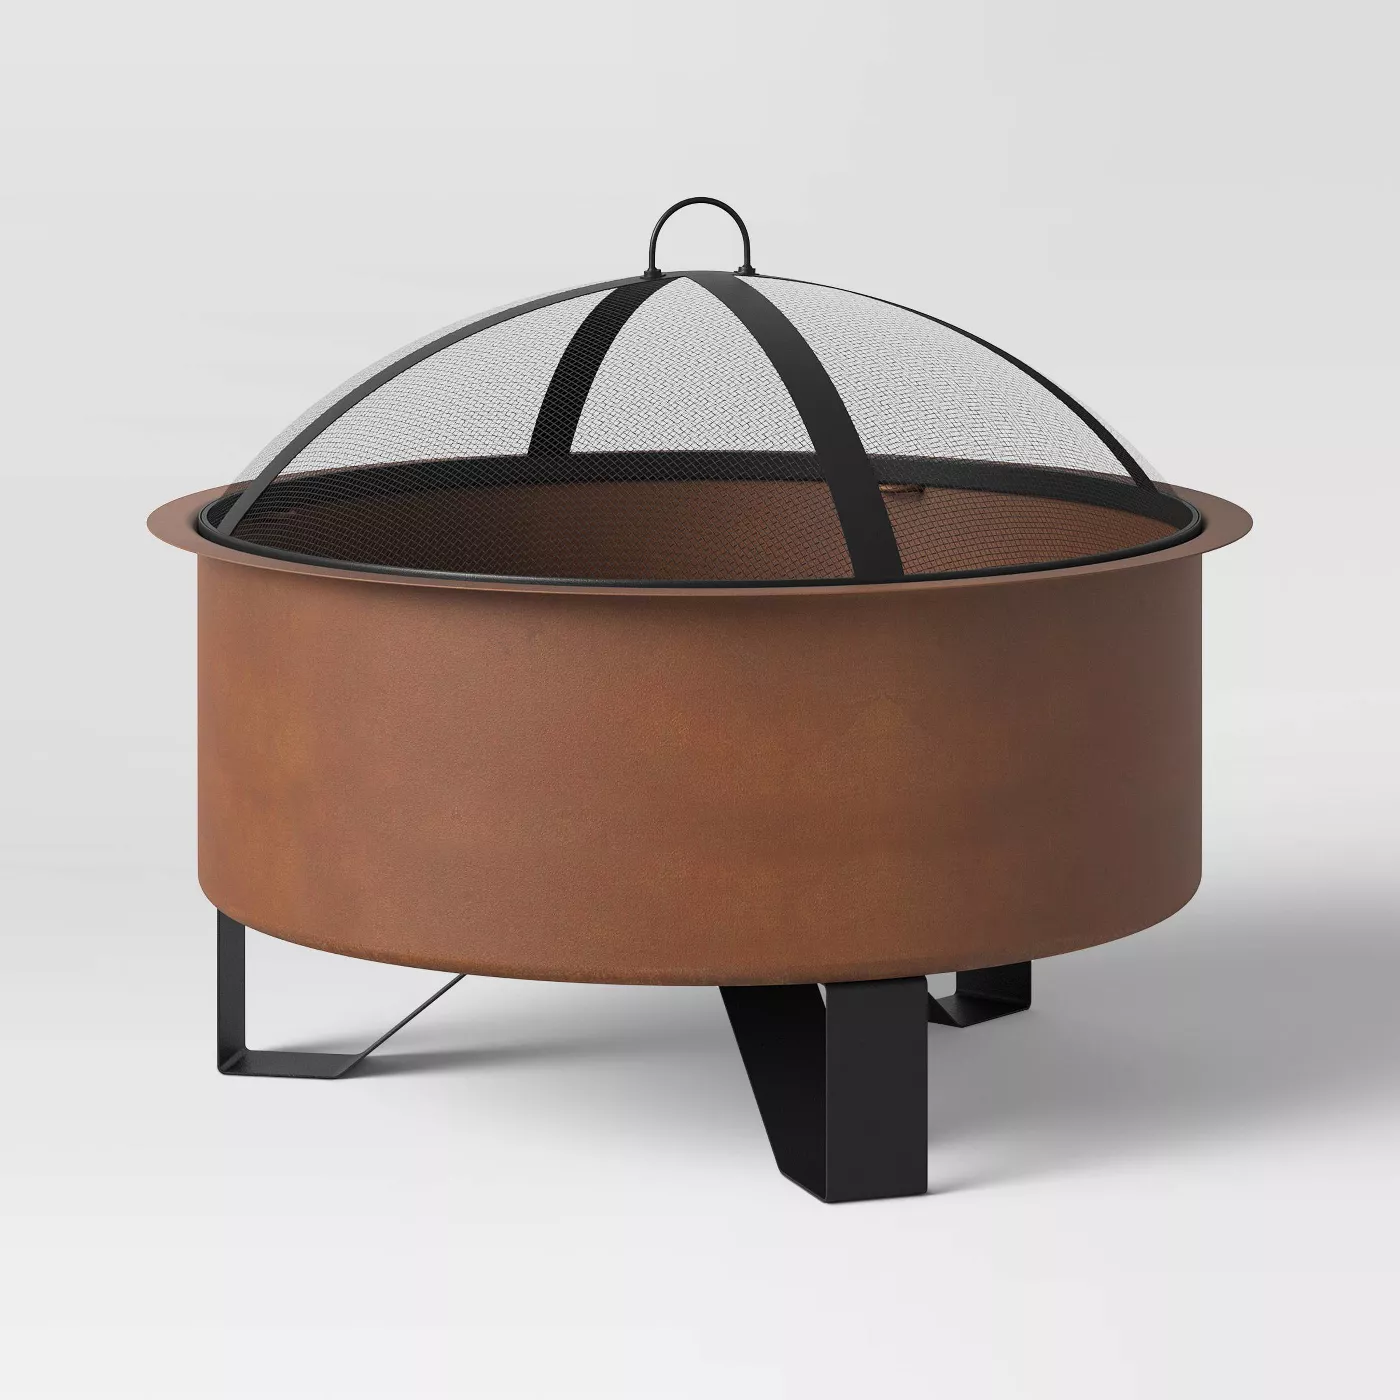 Round Rust Look Wood Burning Outdoor Fire Pit - Threshold™ - image 1 of 5